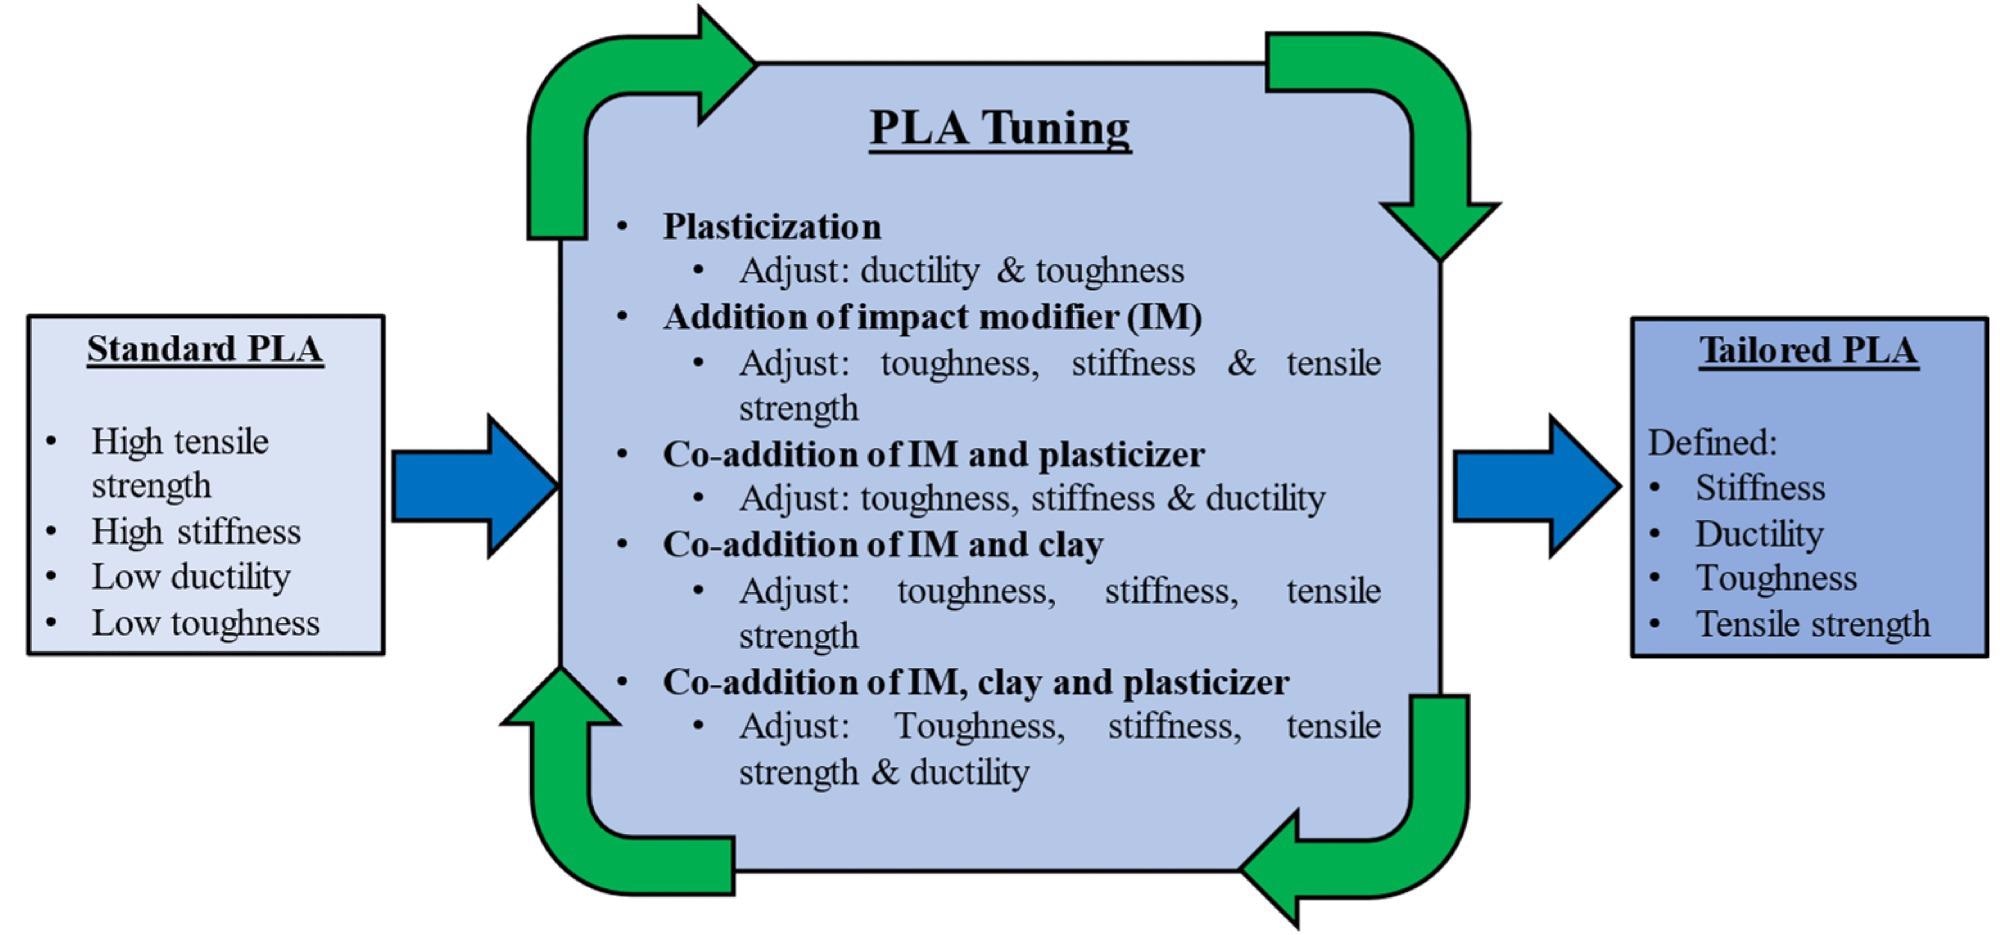 Tuning the properties of PLA with a variety of additives.